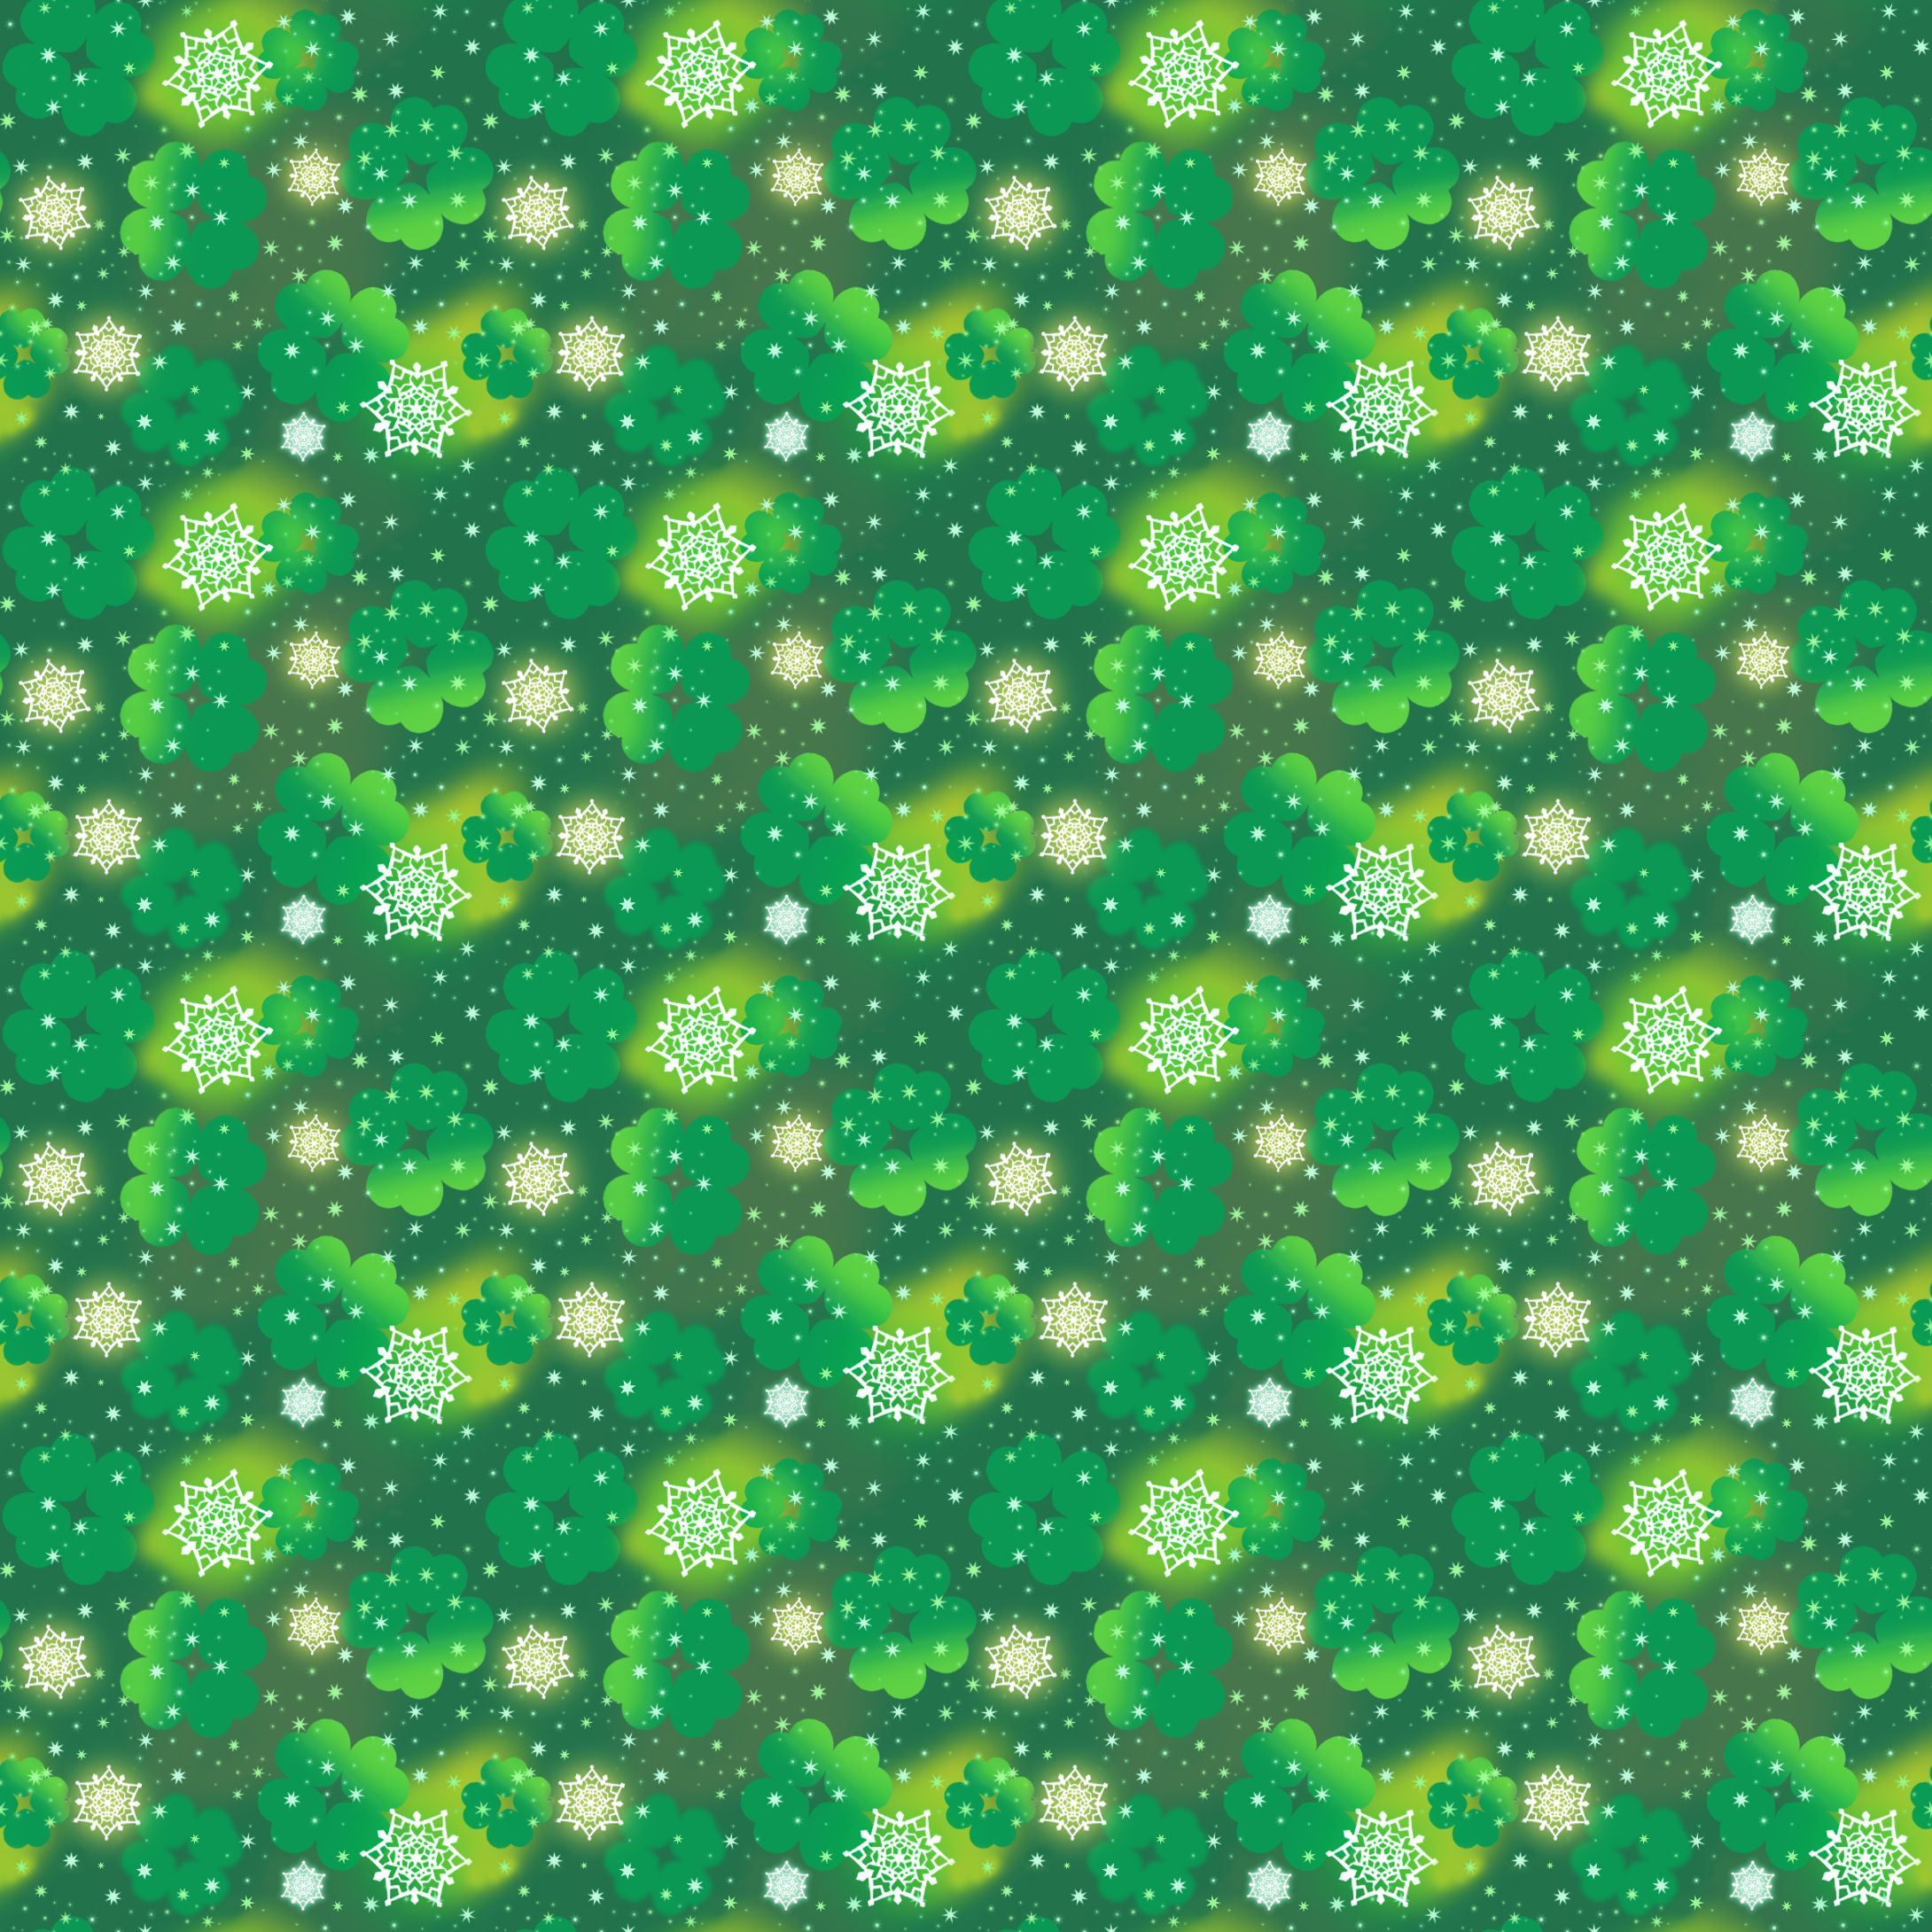 patterns, green, textures, snowflakes, texture, clover